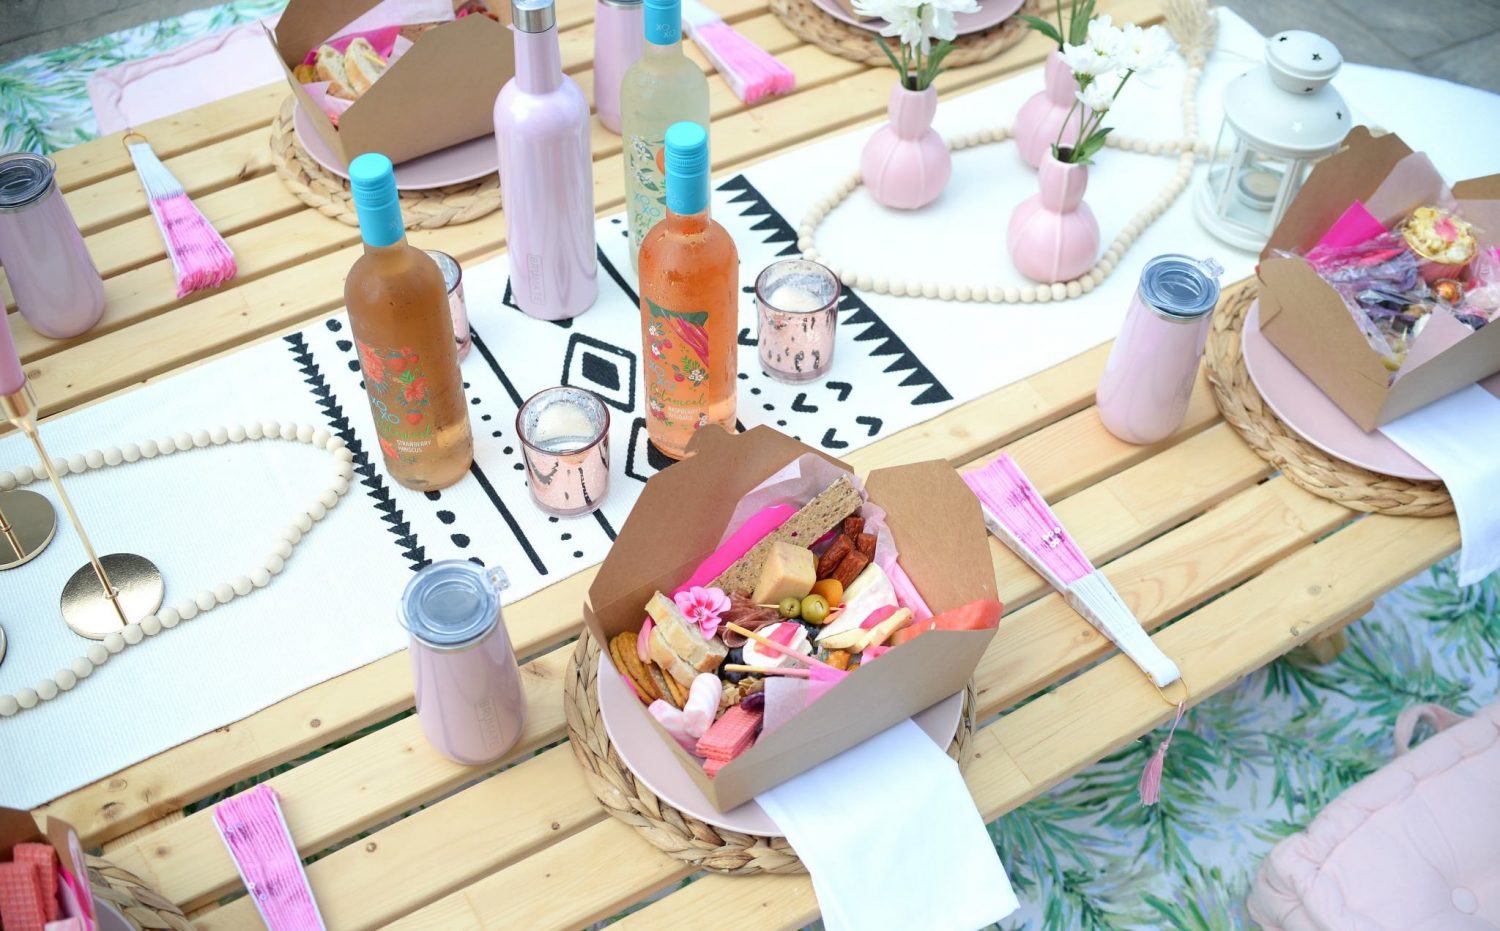 Guide to Hosting the Ultimate Boho Picnic